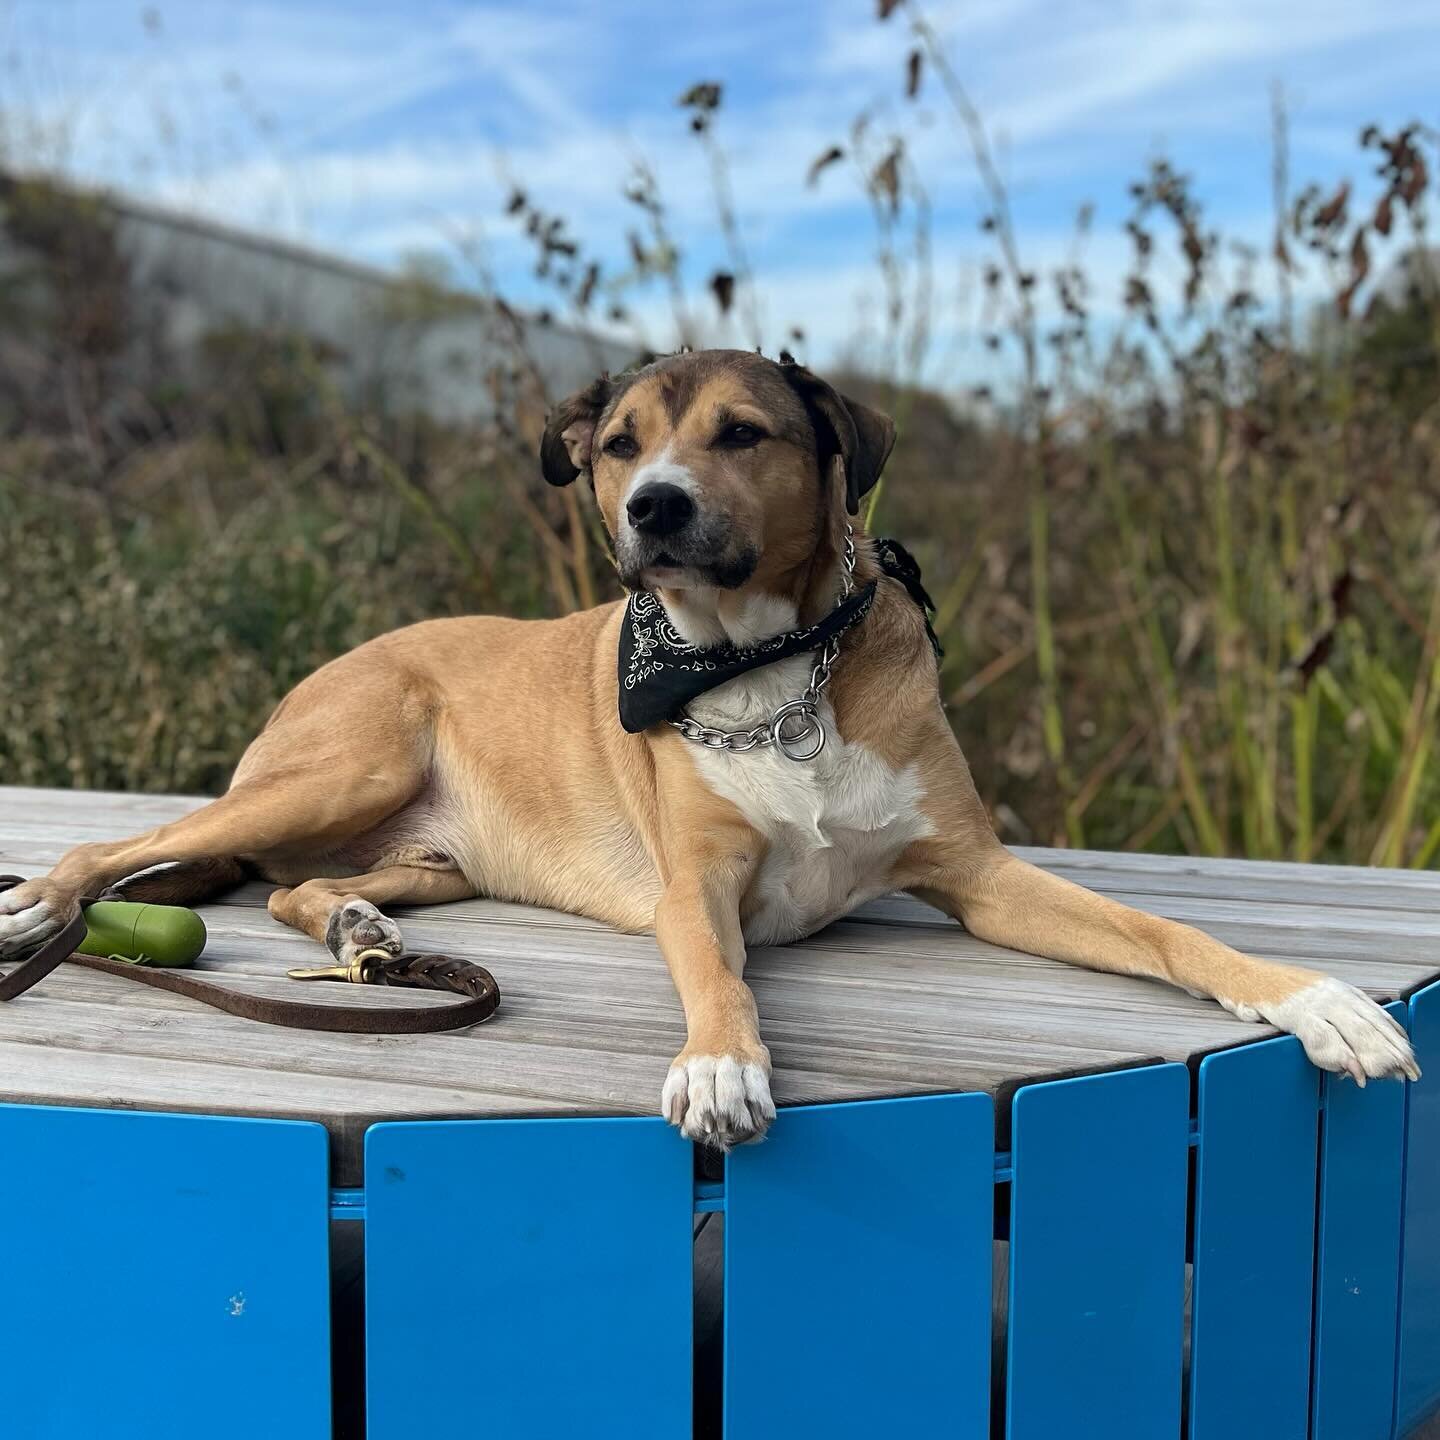 Meet The Team: Bubba Tucker, Head of Goose Relations. 

Bubba Tucker valiantly defends the Wild Mile from geese who threaten to eat our native plants and poop on the boardwalk &hellip; then he eats our native plants and poops on the boardwalk. Just t